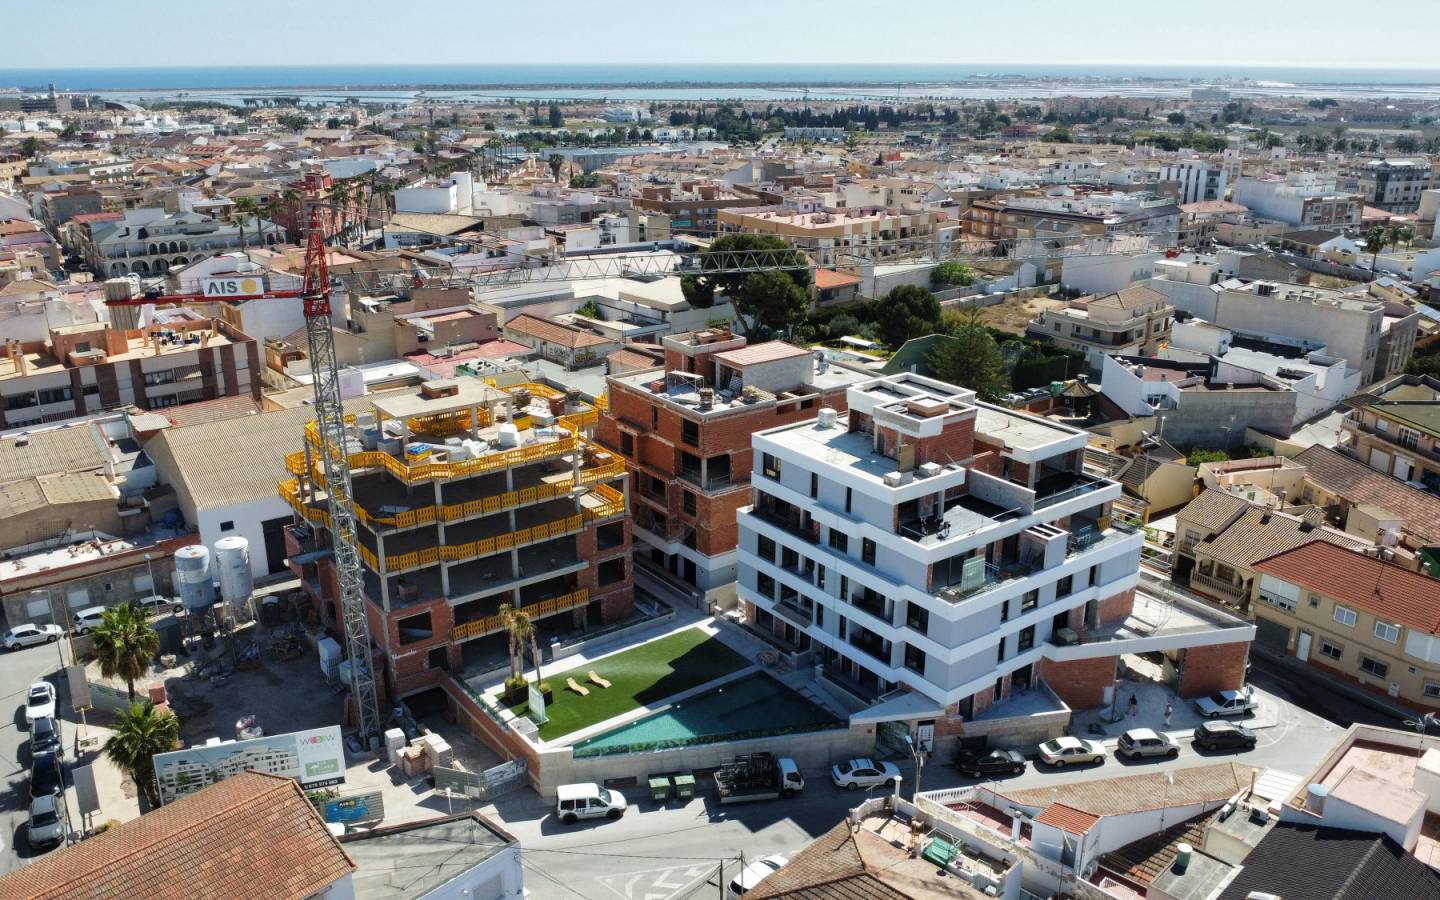 Apartment for sale in San Pedro del Pinatar and San Javier 2